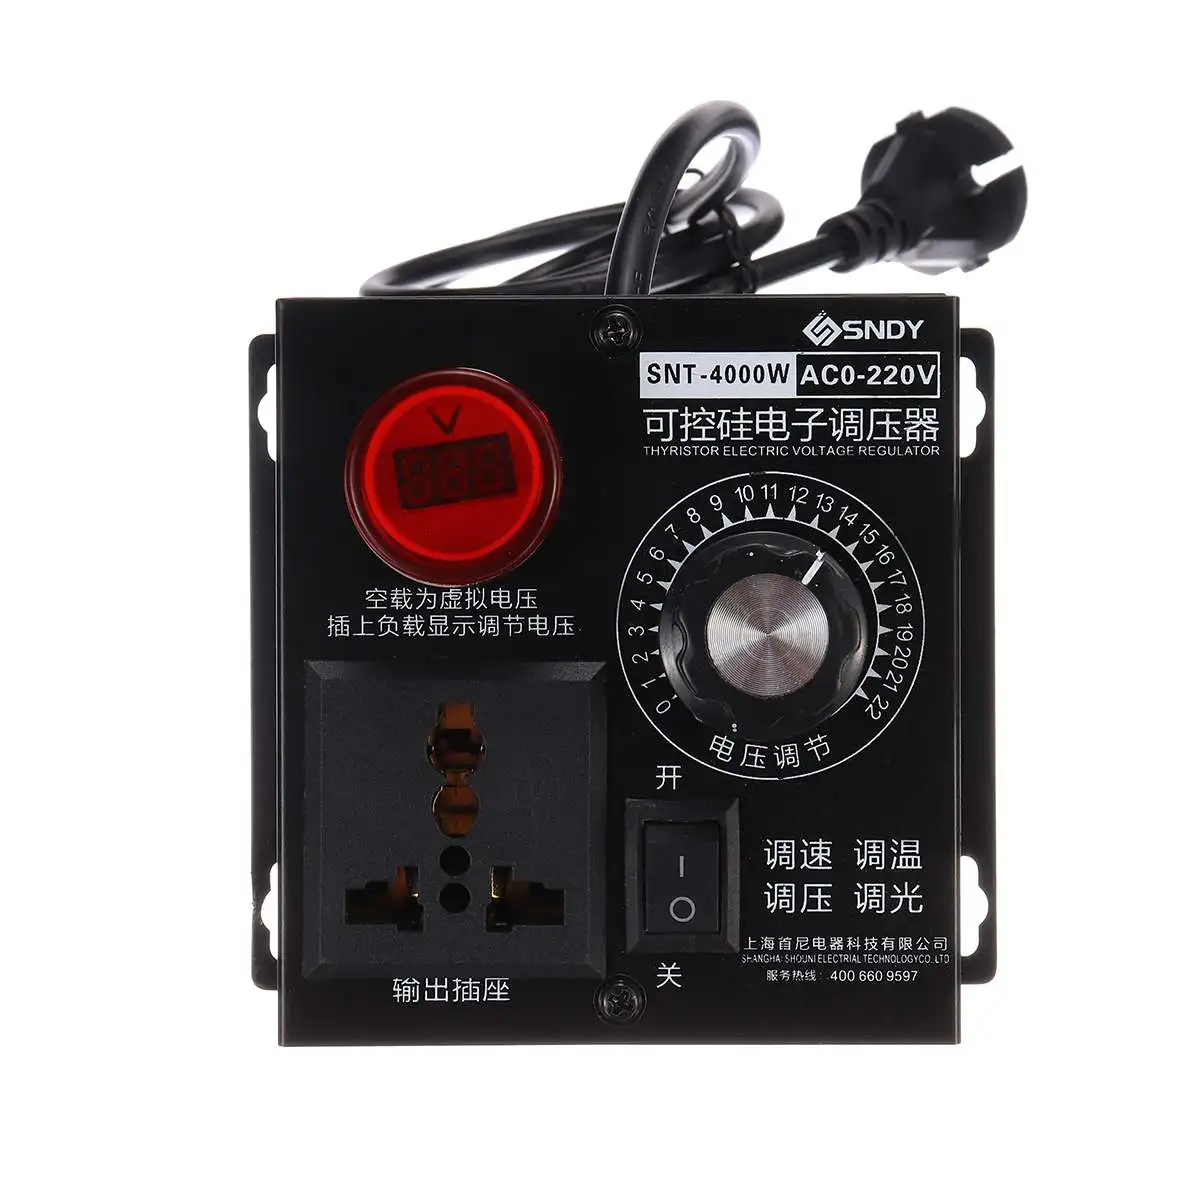 

0V-220V 4000W AC High Power Silicon Electronics Voltage Regulator Machinery Electric Variable Speed Controller